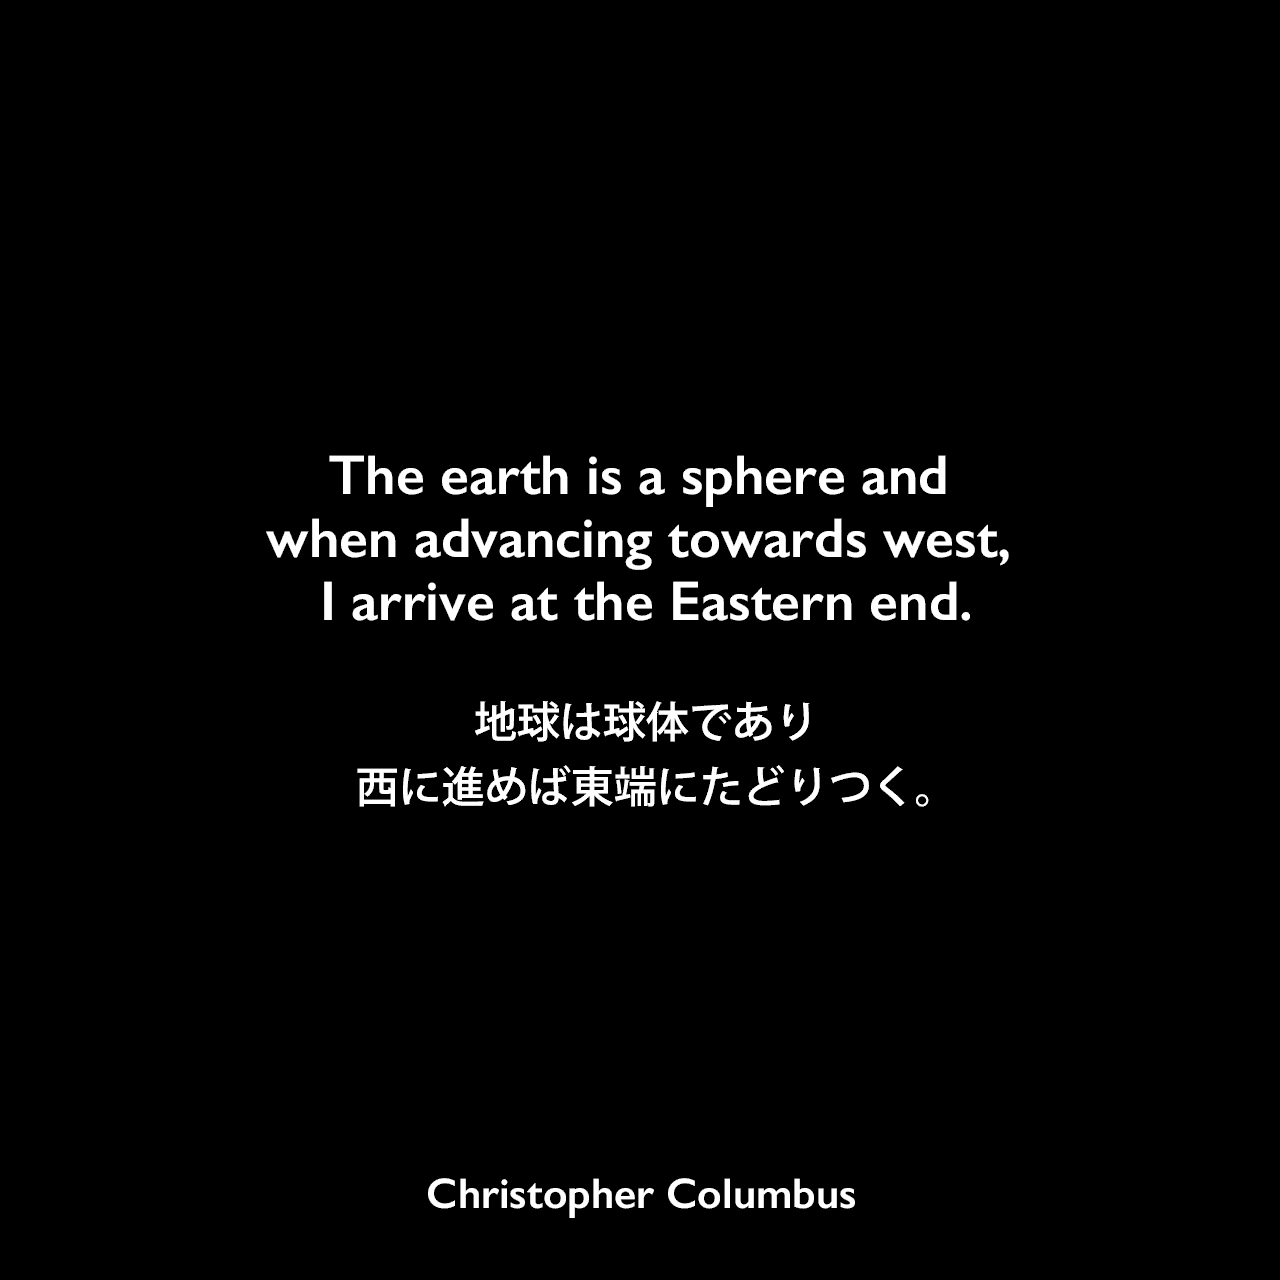 The earth is a sphere and when advancing towards west, I arrive at the Eastern end.地球は球体であり、西に進めば東端にたどりつく。Christopher Columbus